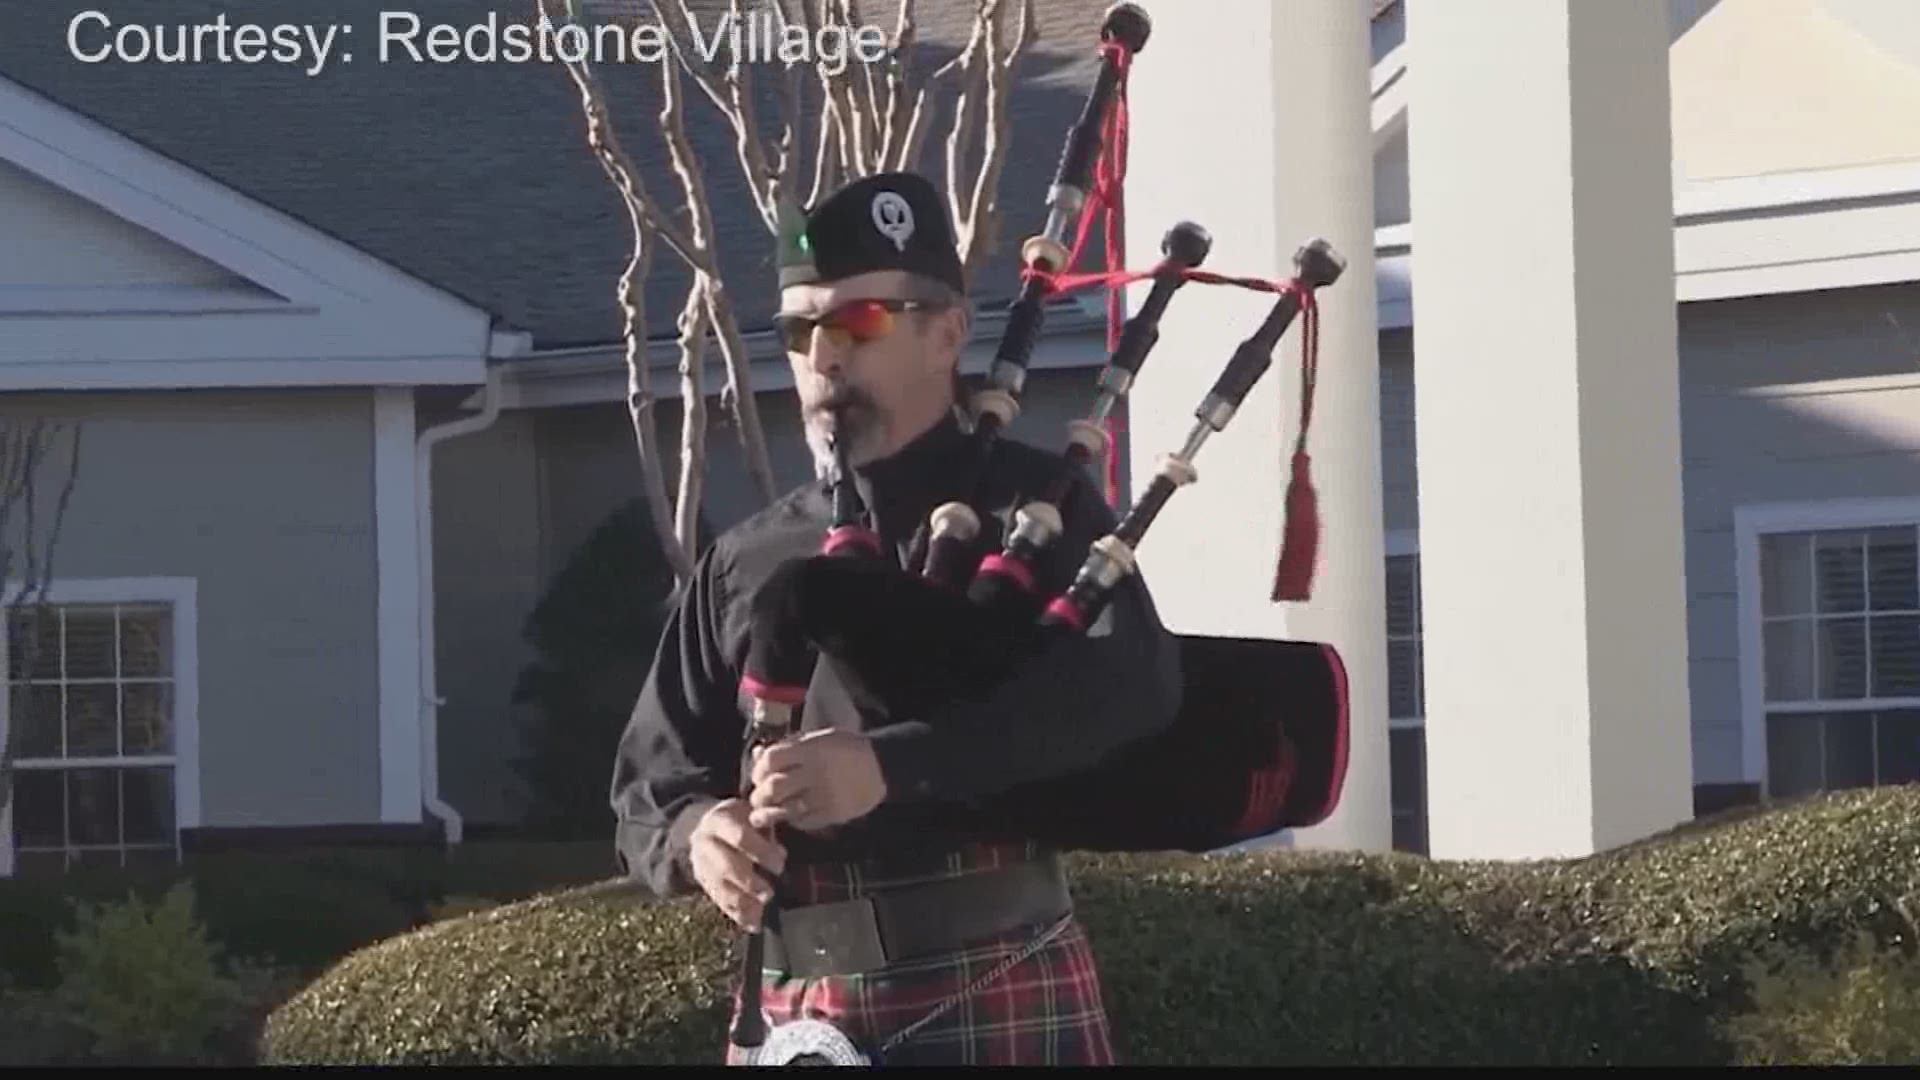 The bagpiper is performing for the residents every Wednesday and Friday until the quarantine is over.